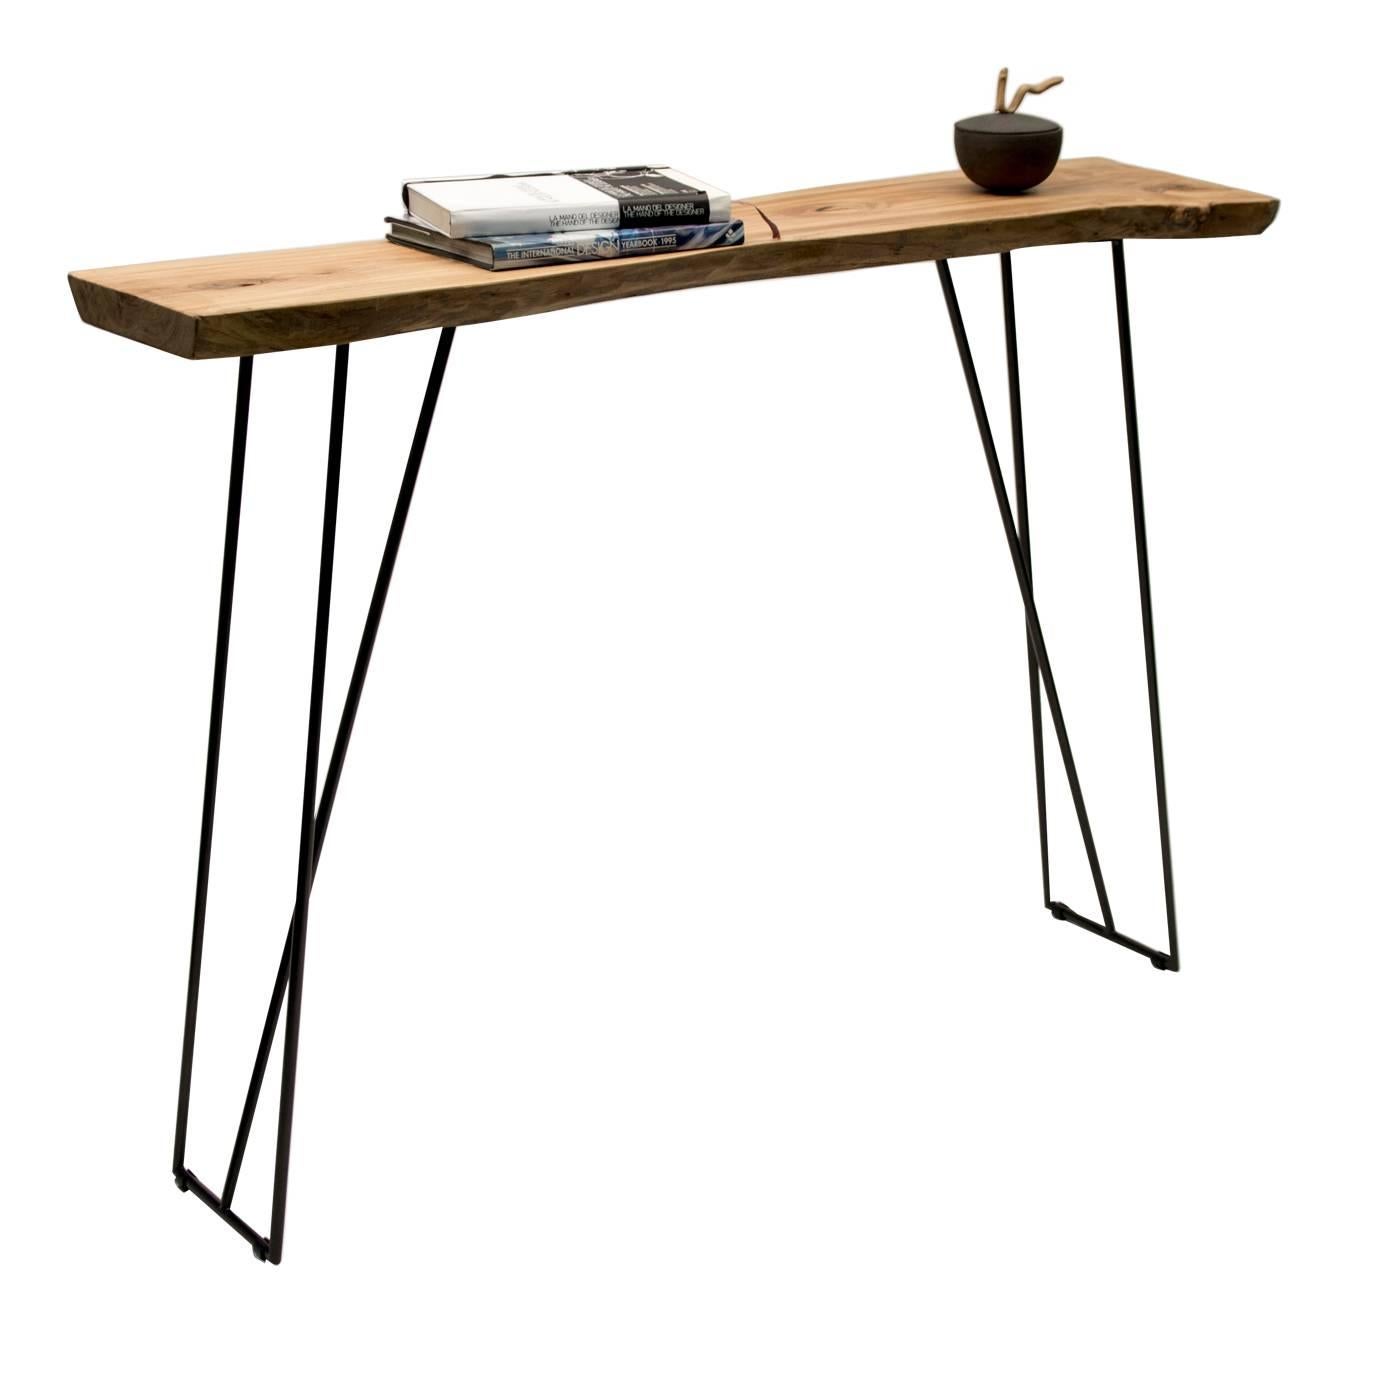 This elegant yet rustic side console features a slim metal supporting structure with black powder coating. The top is made of solid, aged olivewood, with a wax polish and natural, raw edges. This piece is one-of-a-kind.